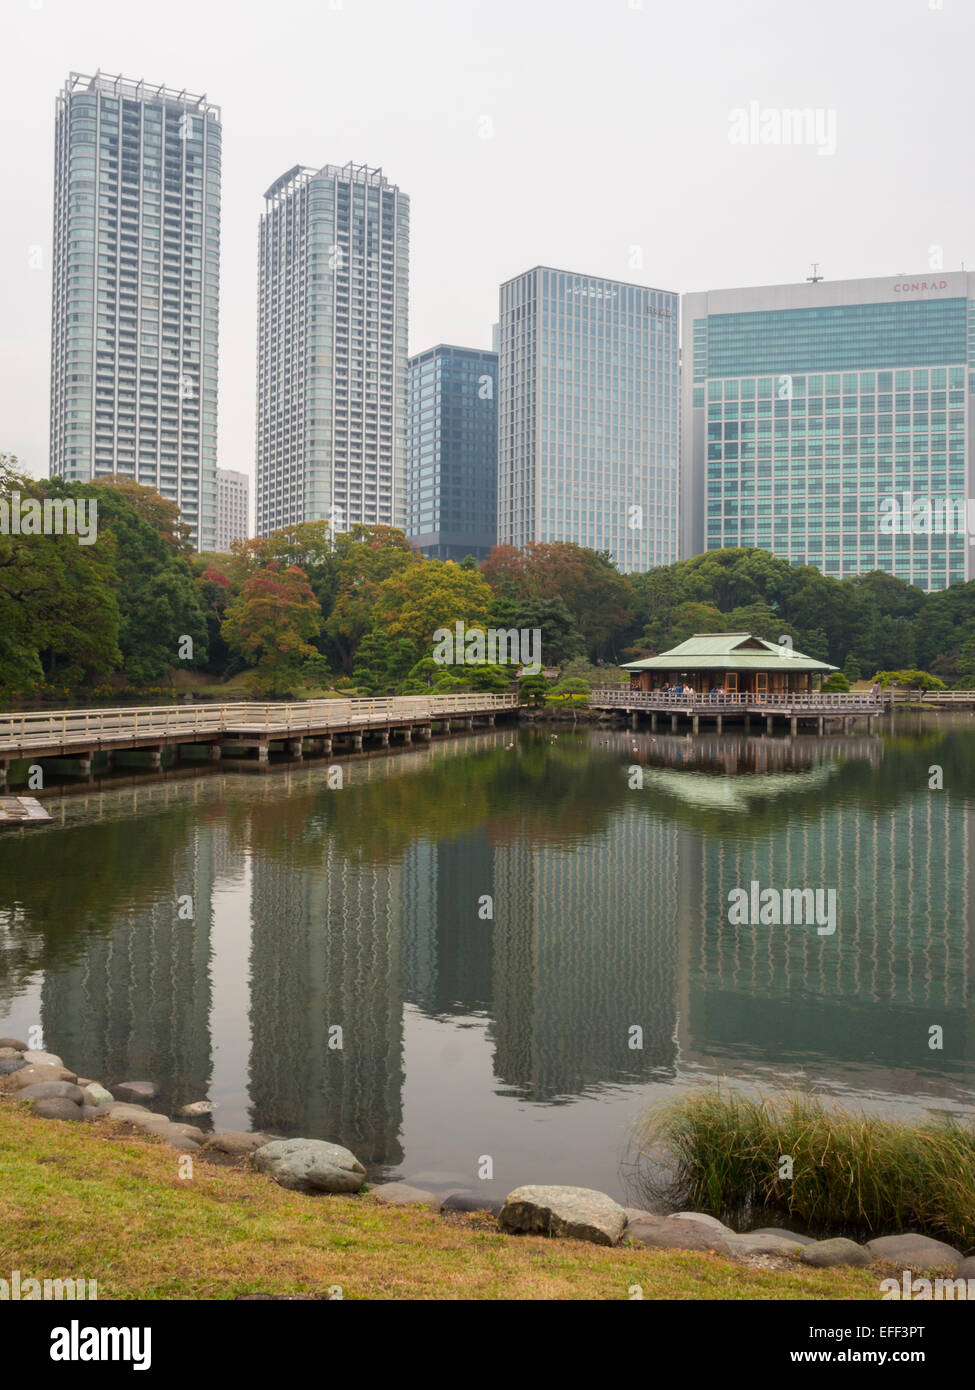 Hama Rikyu Onshi-teien reflected landscape with teahouse, trees and skyscrapers Stock Photo